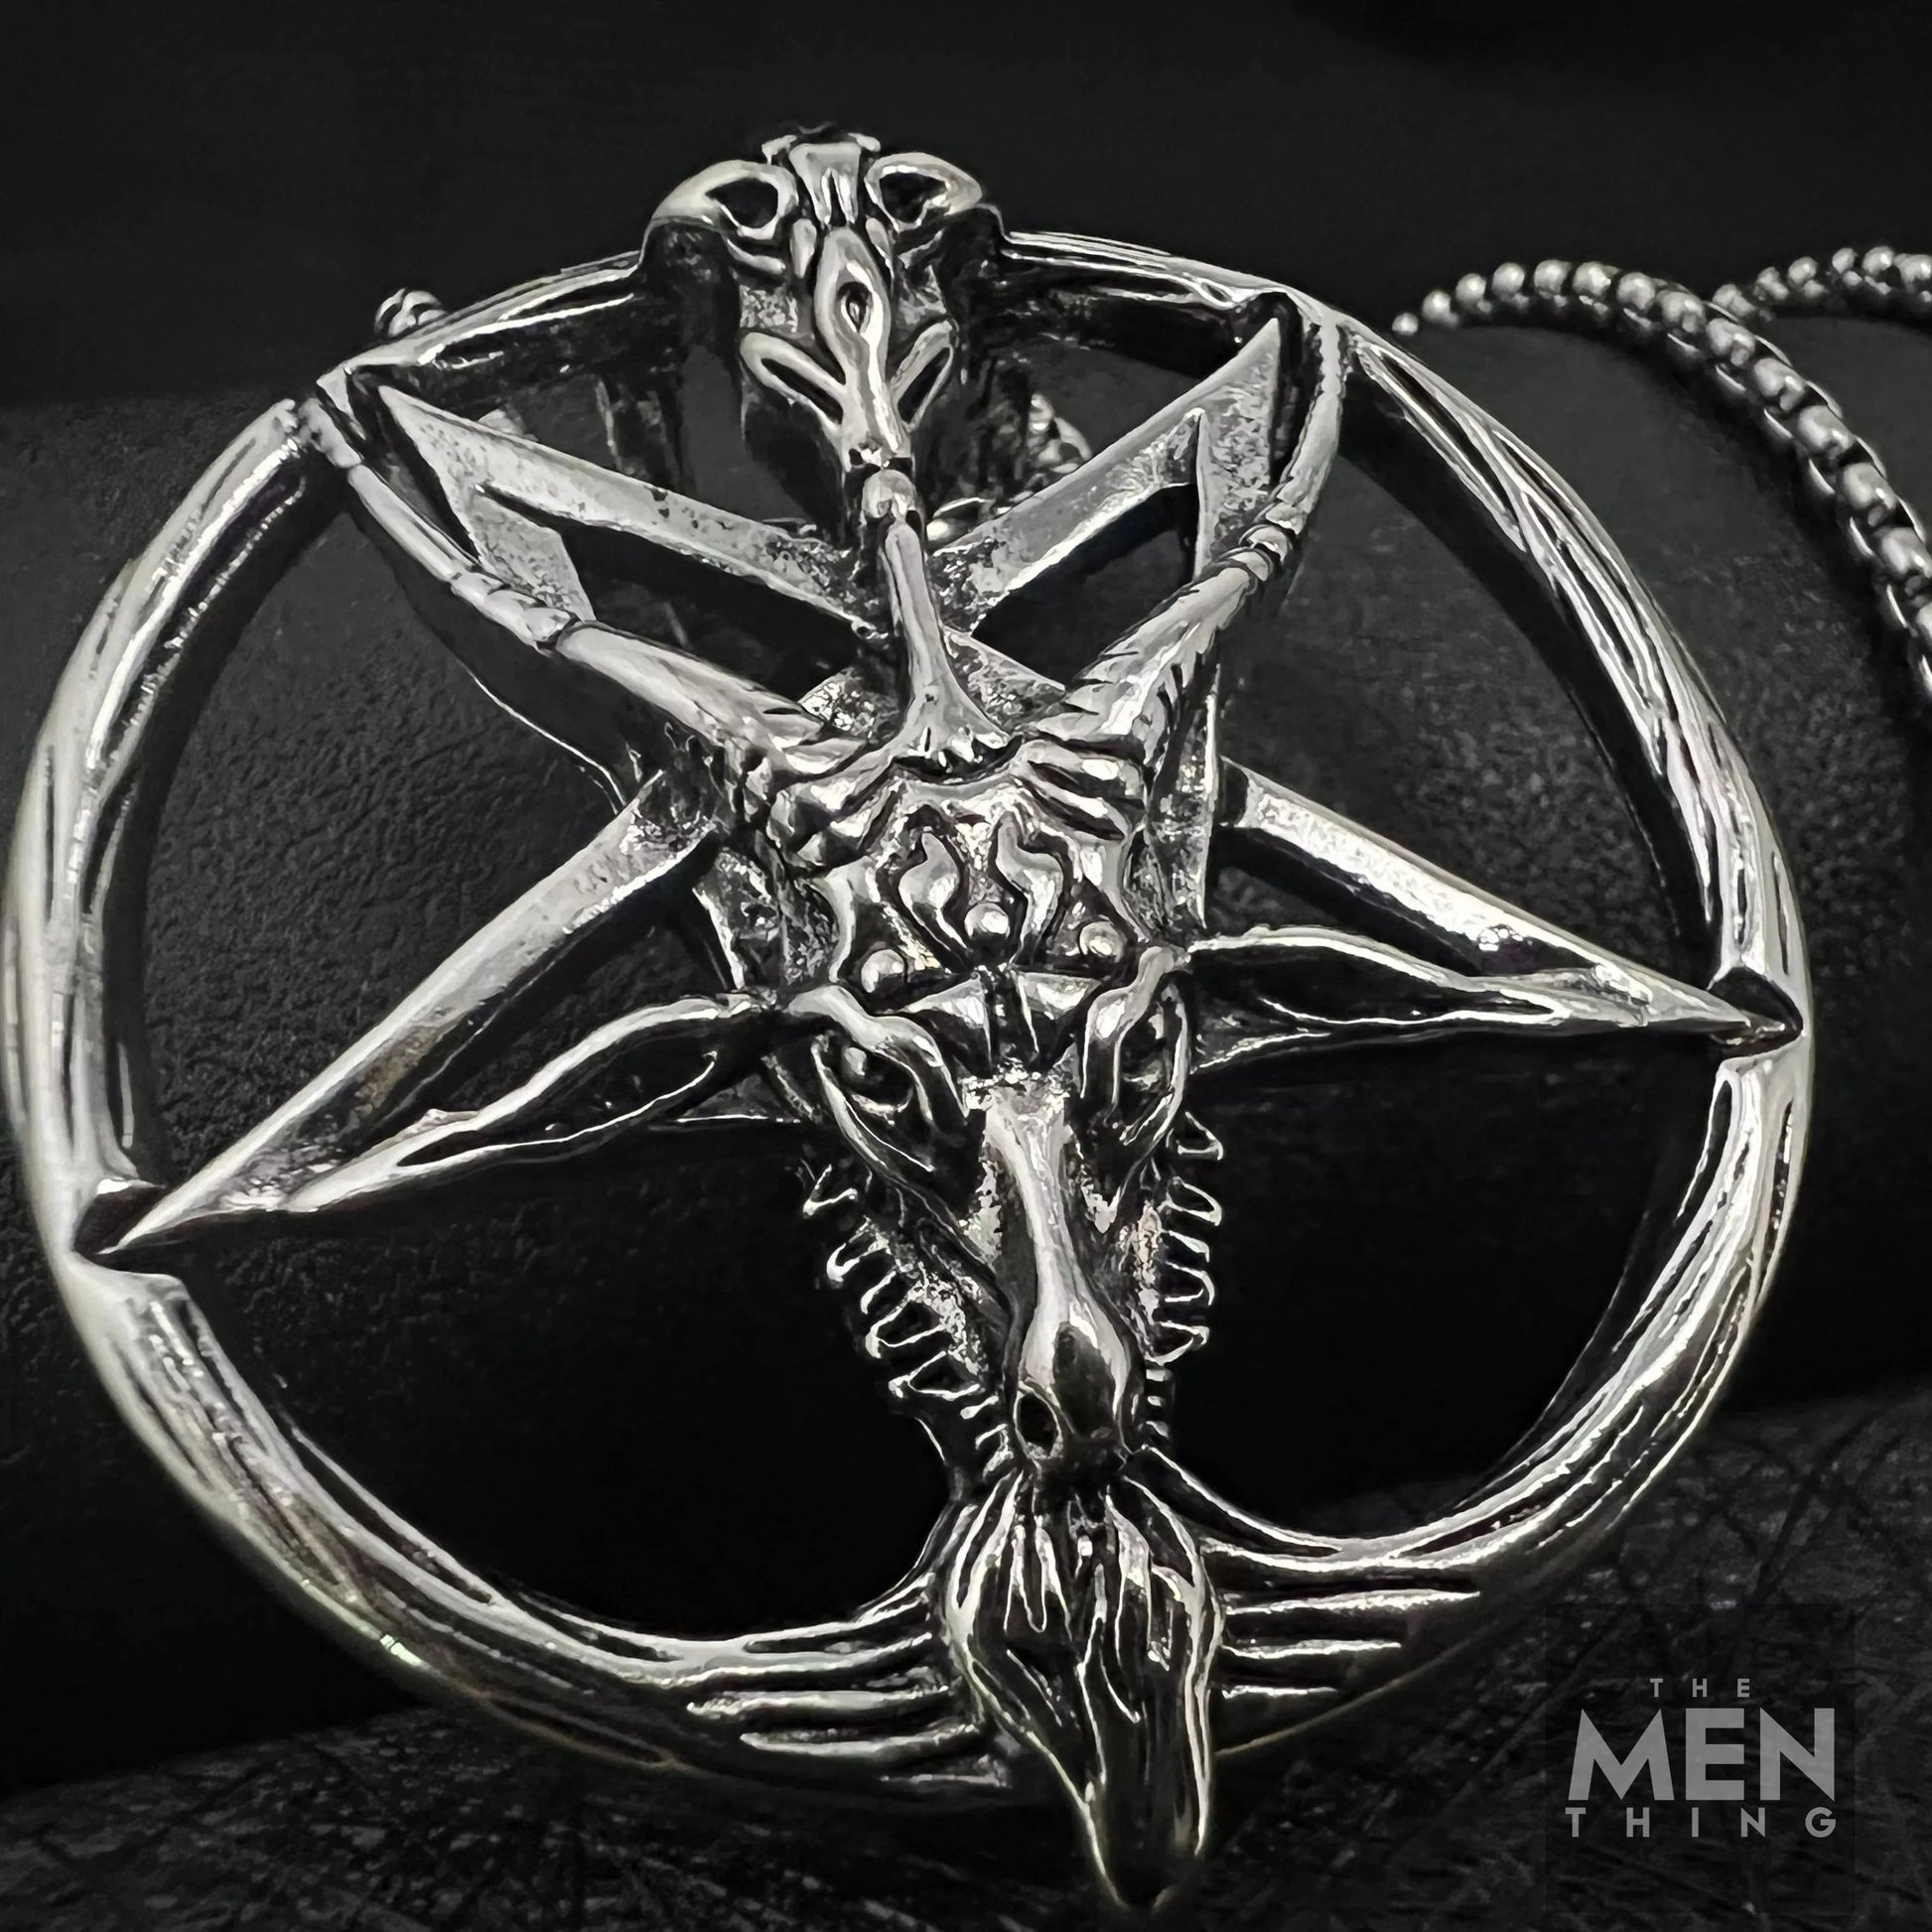 THE MEN THING Alloy Goat Pendant with Pure Stainless Steel 24inch Chain for Men, American trending Style - Round Box Chain & Pendant for Men & Boy